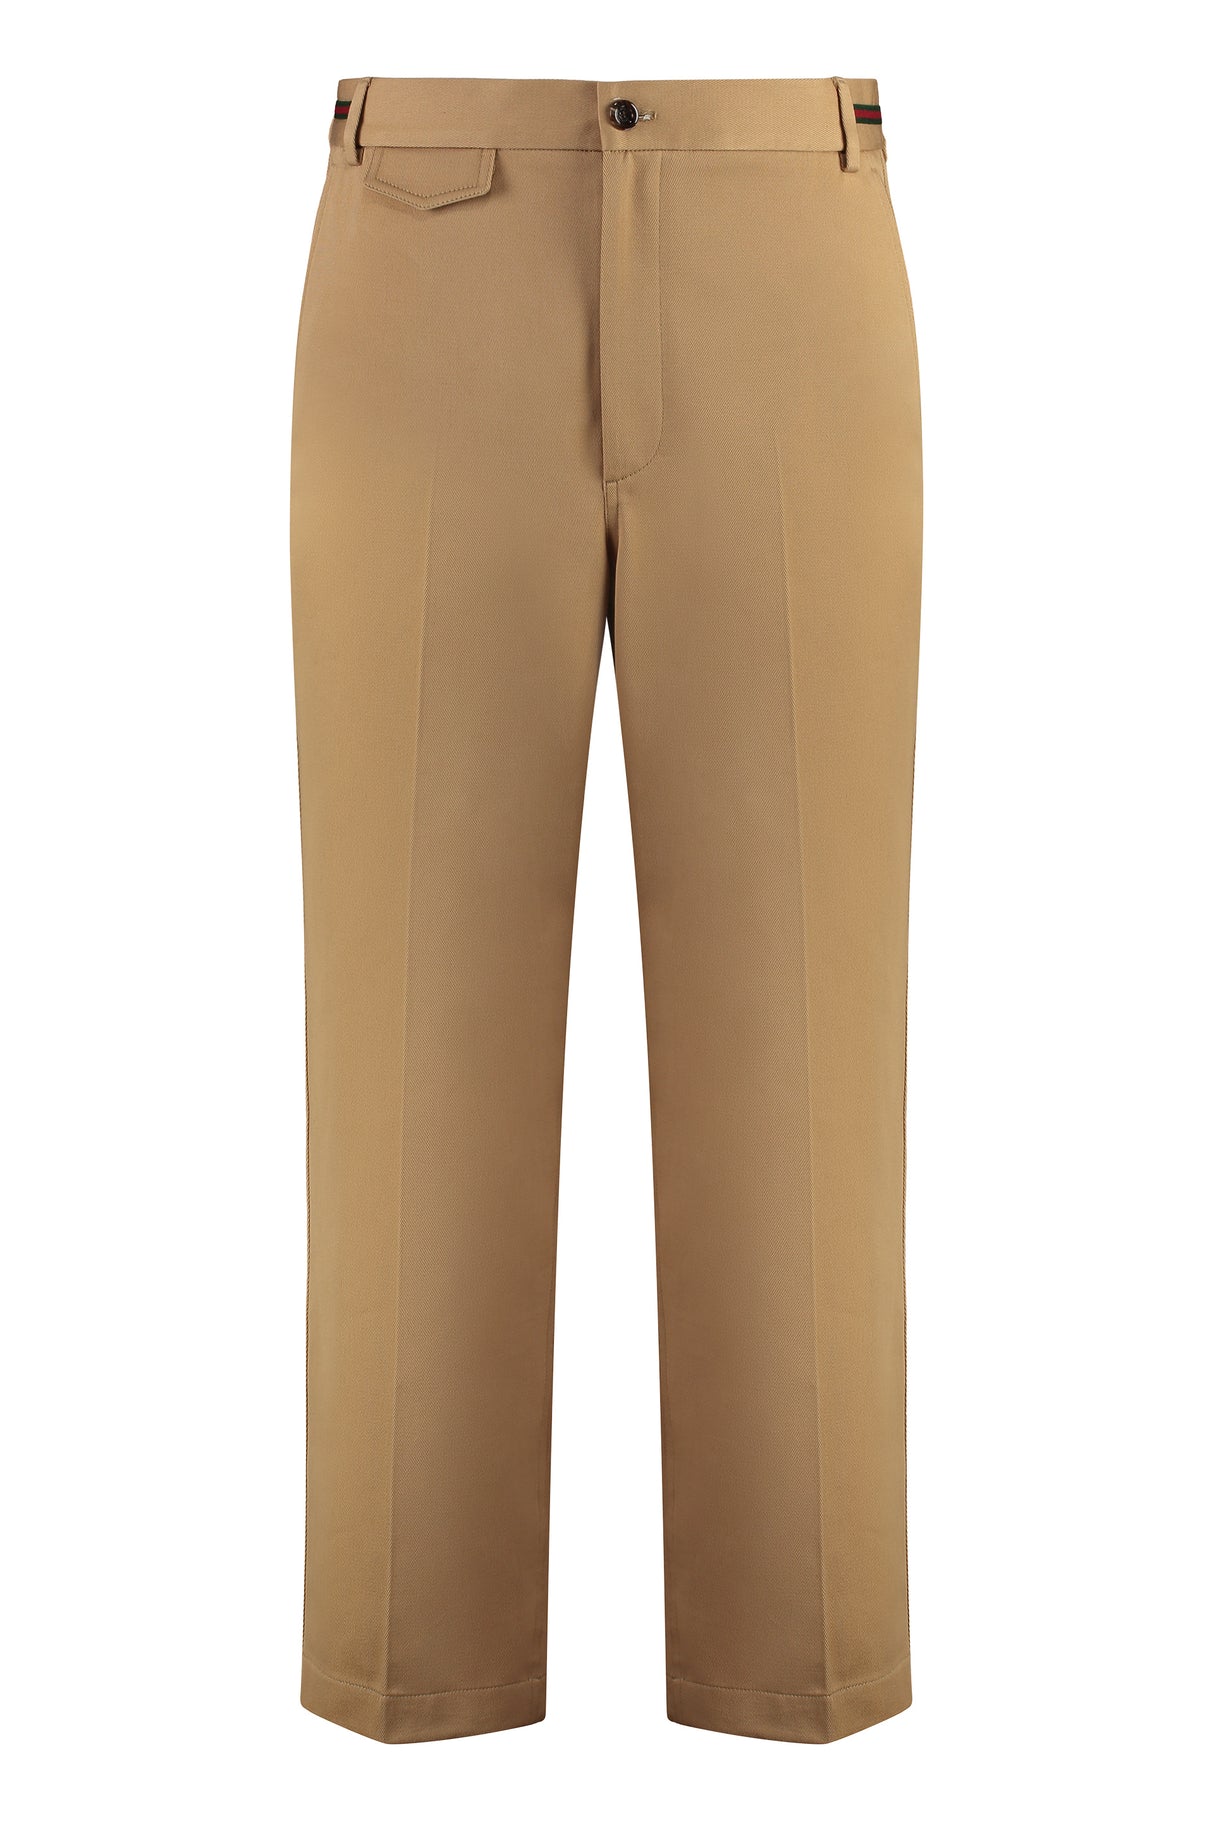 GUCCI Men's Tan Cotton Trousers for Spring/Summer 2024